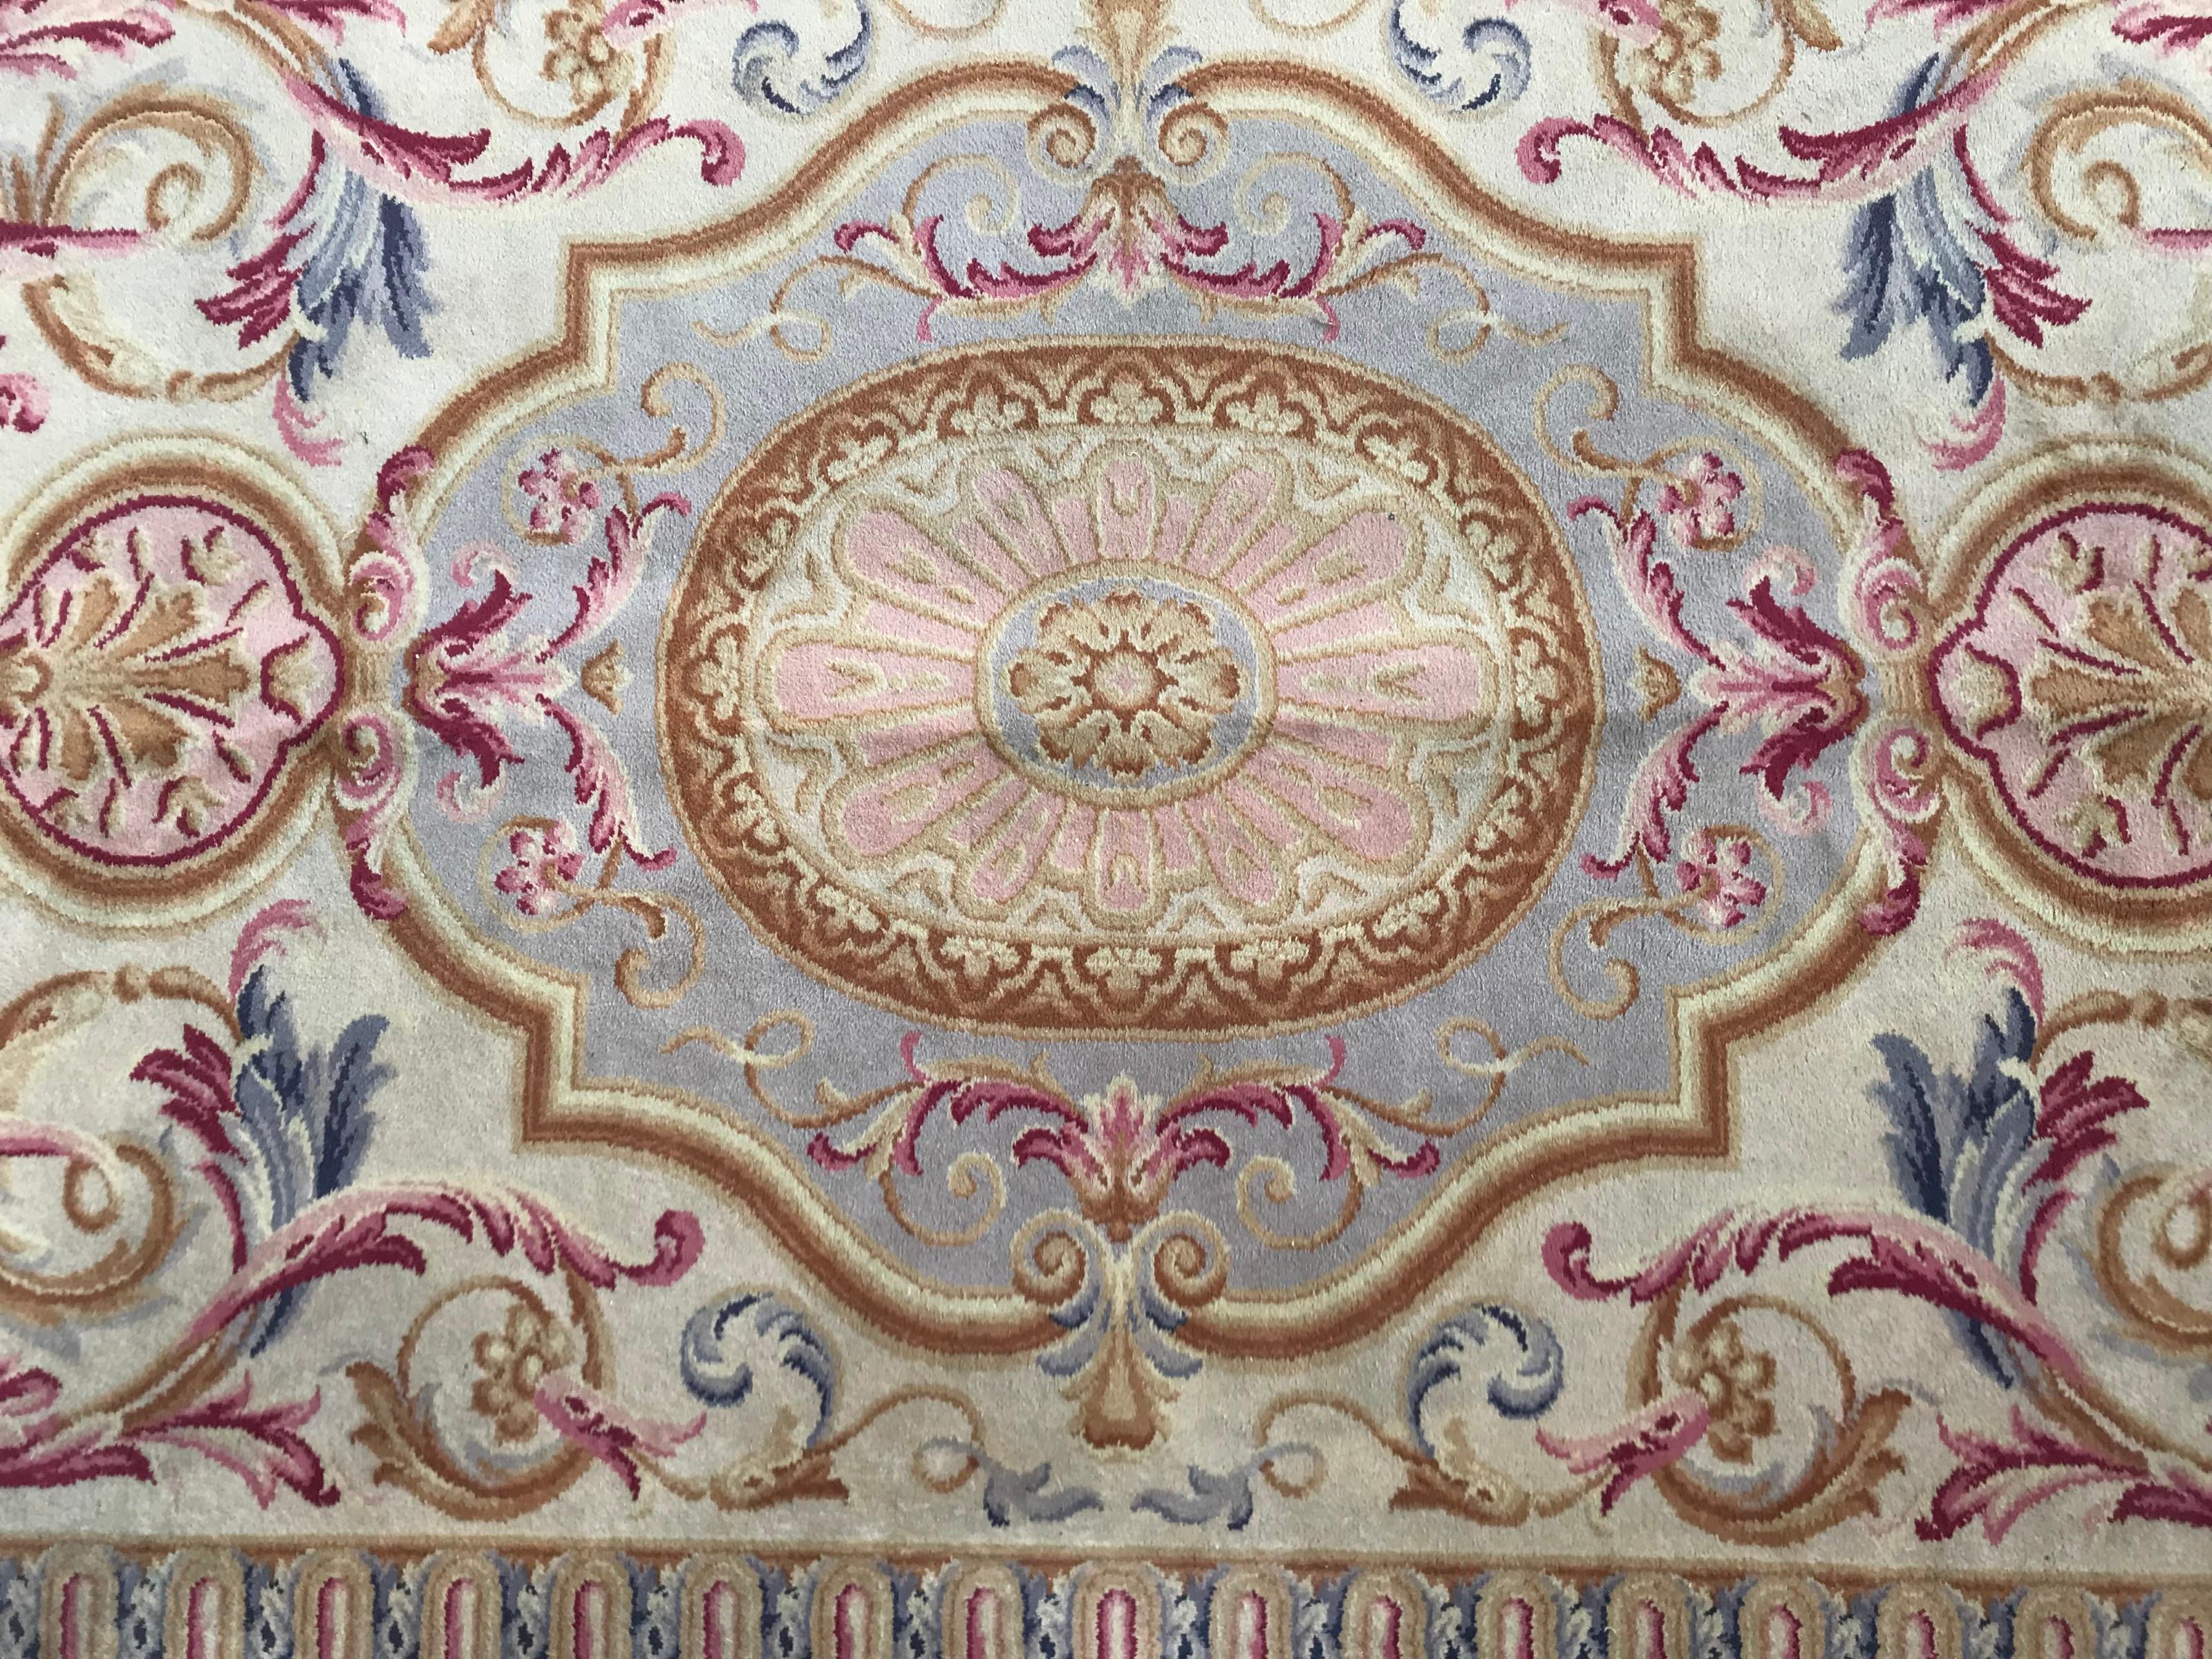 Beautiful knotted rug with a nice floral design of Louis XVI (Louis 16th) Savonnerie’s, beautiful colors with pink, blue, green and brown colors. Entirely knotted with Wool velvet on cotton foundation.